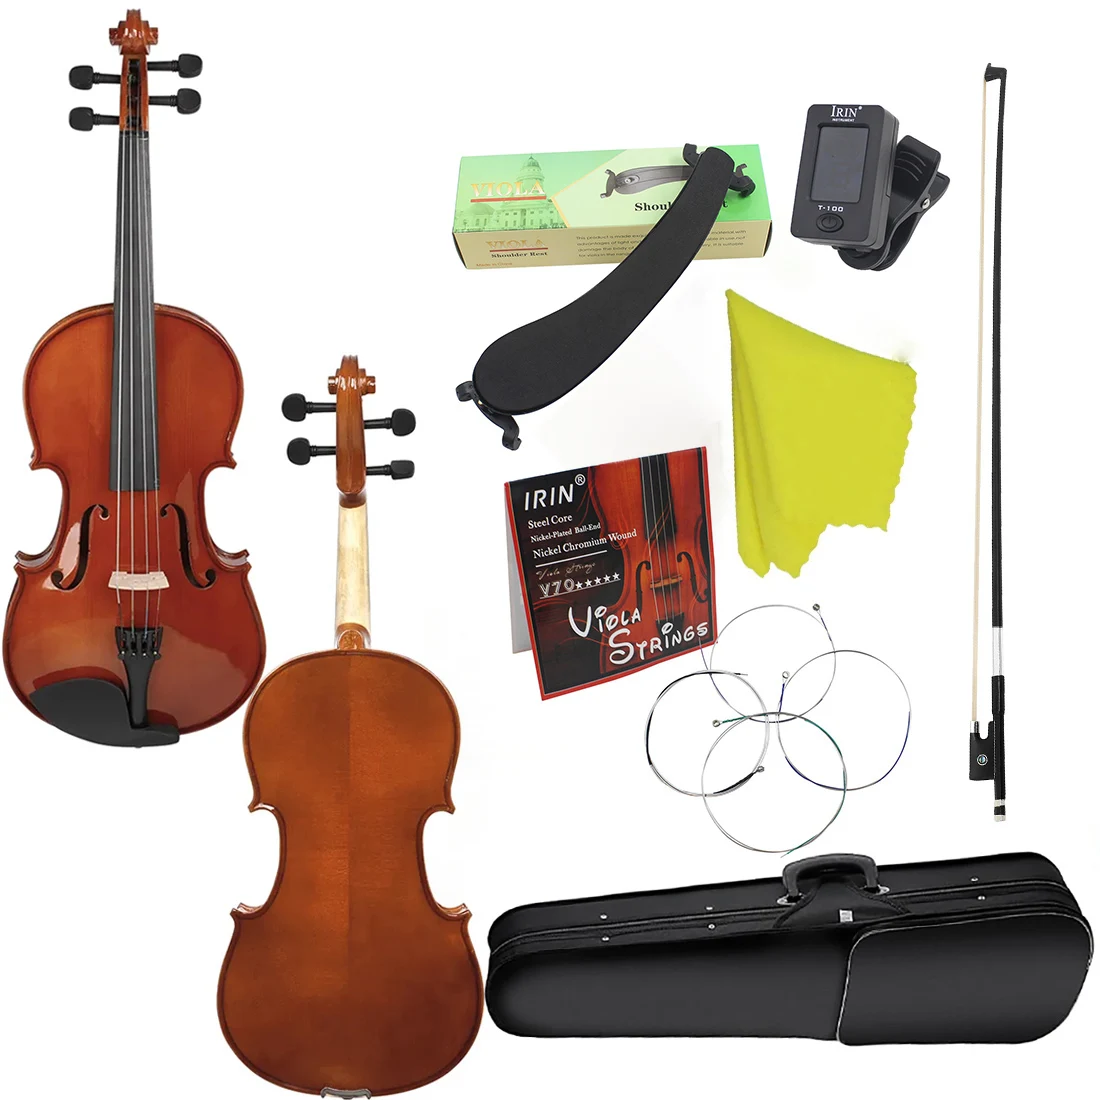 

Astonvilla 16 Inch Viol VA-35 Spruce Panel Acoustic Viola with Case Bow Shoulder Rest Strings Tuner Cleaning Cloth Accessories